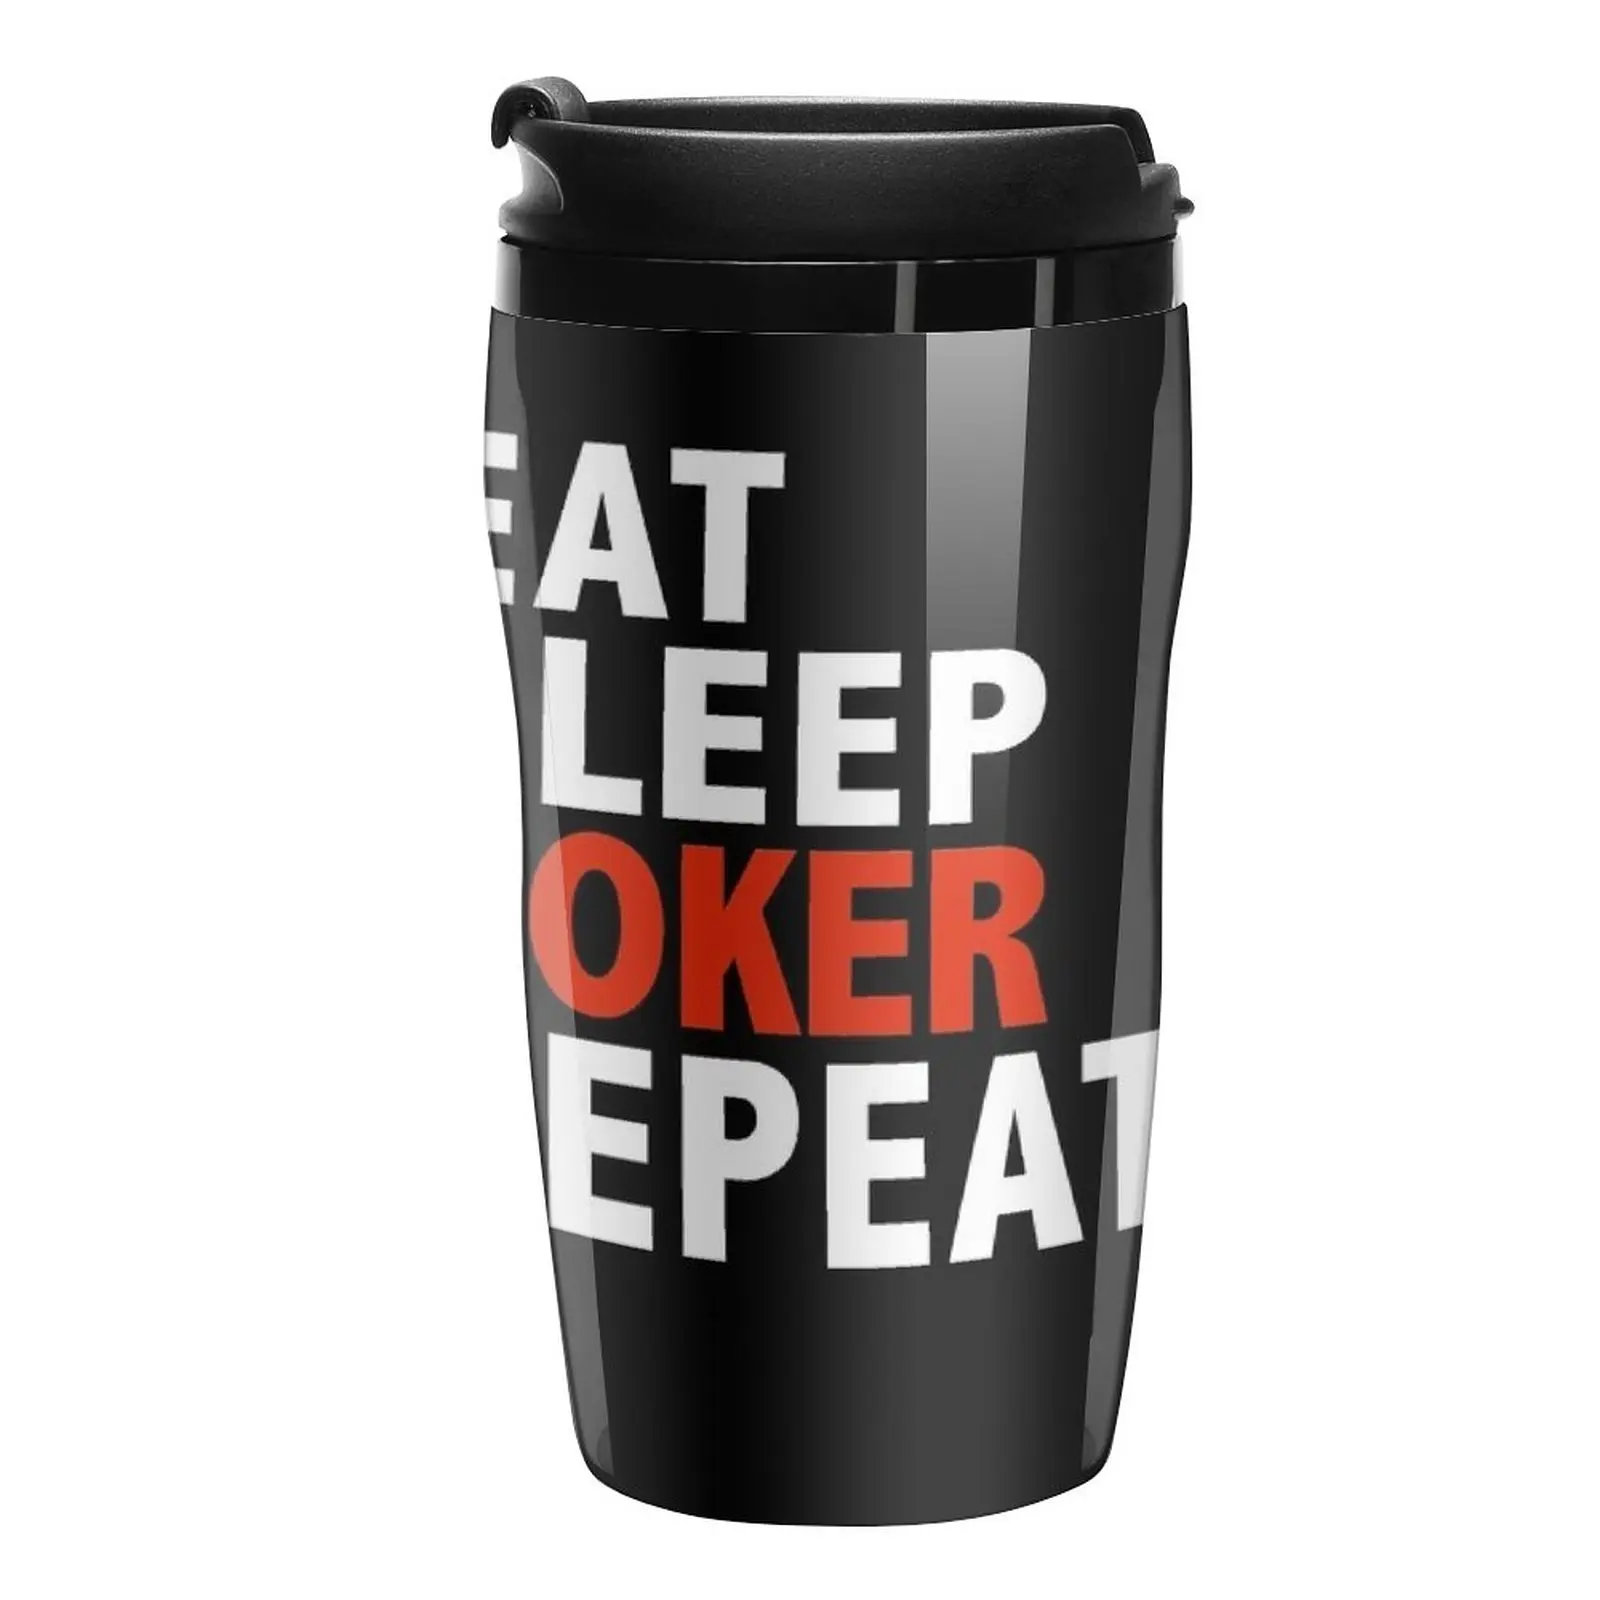 

New Eat Sleep Poker Repeat Gambling Gambler Travel Coffee Mug Cup Set Of Coffee Cute And Different Cups